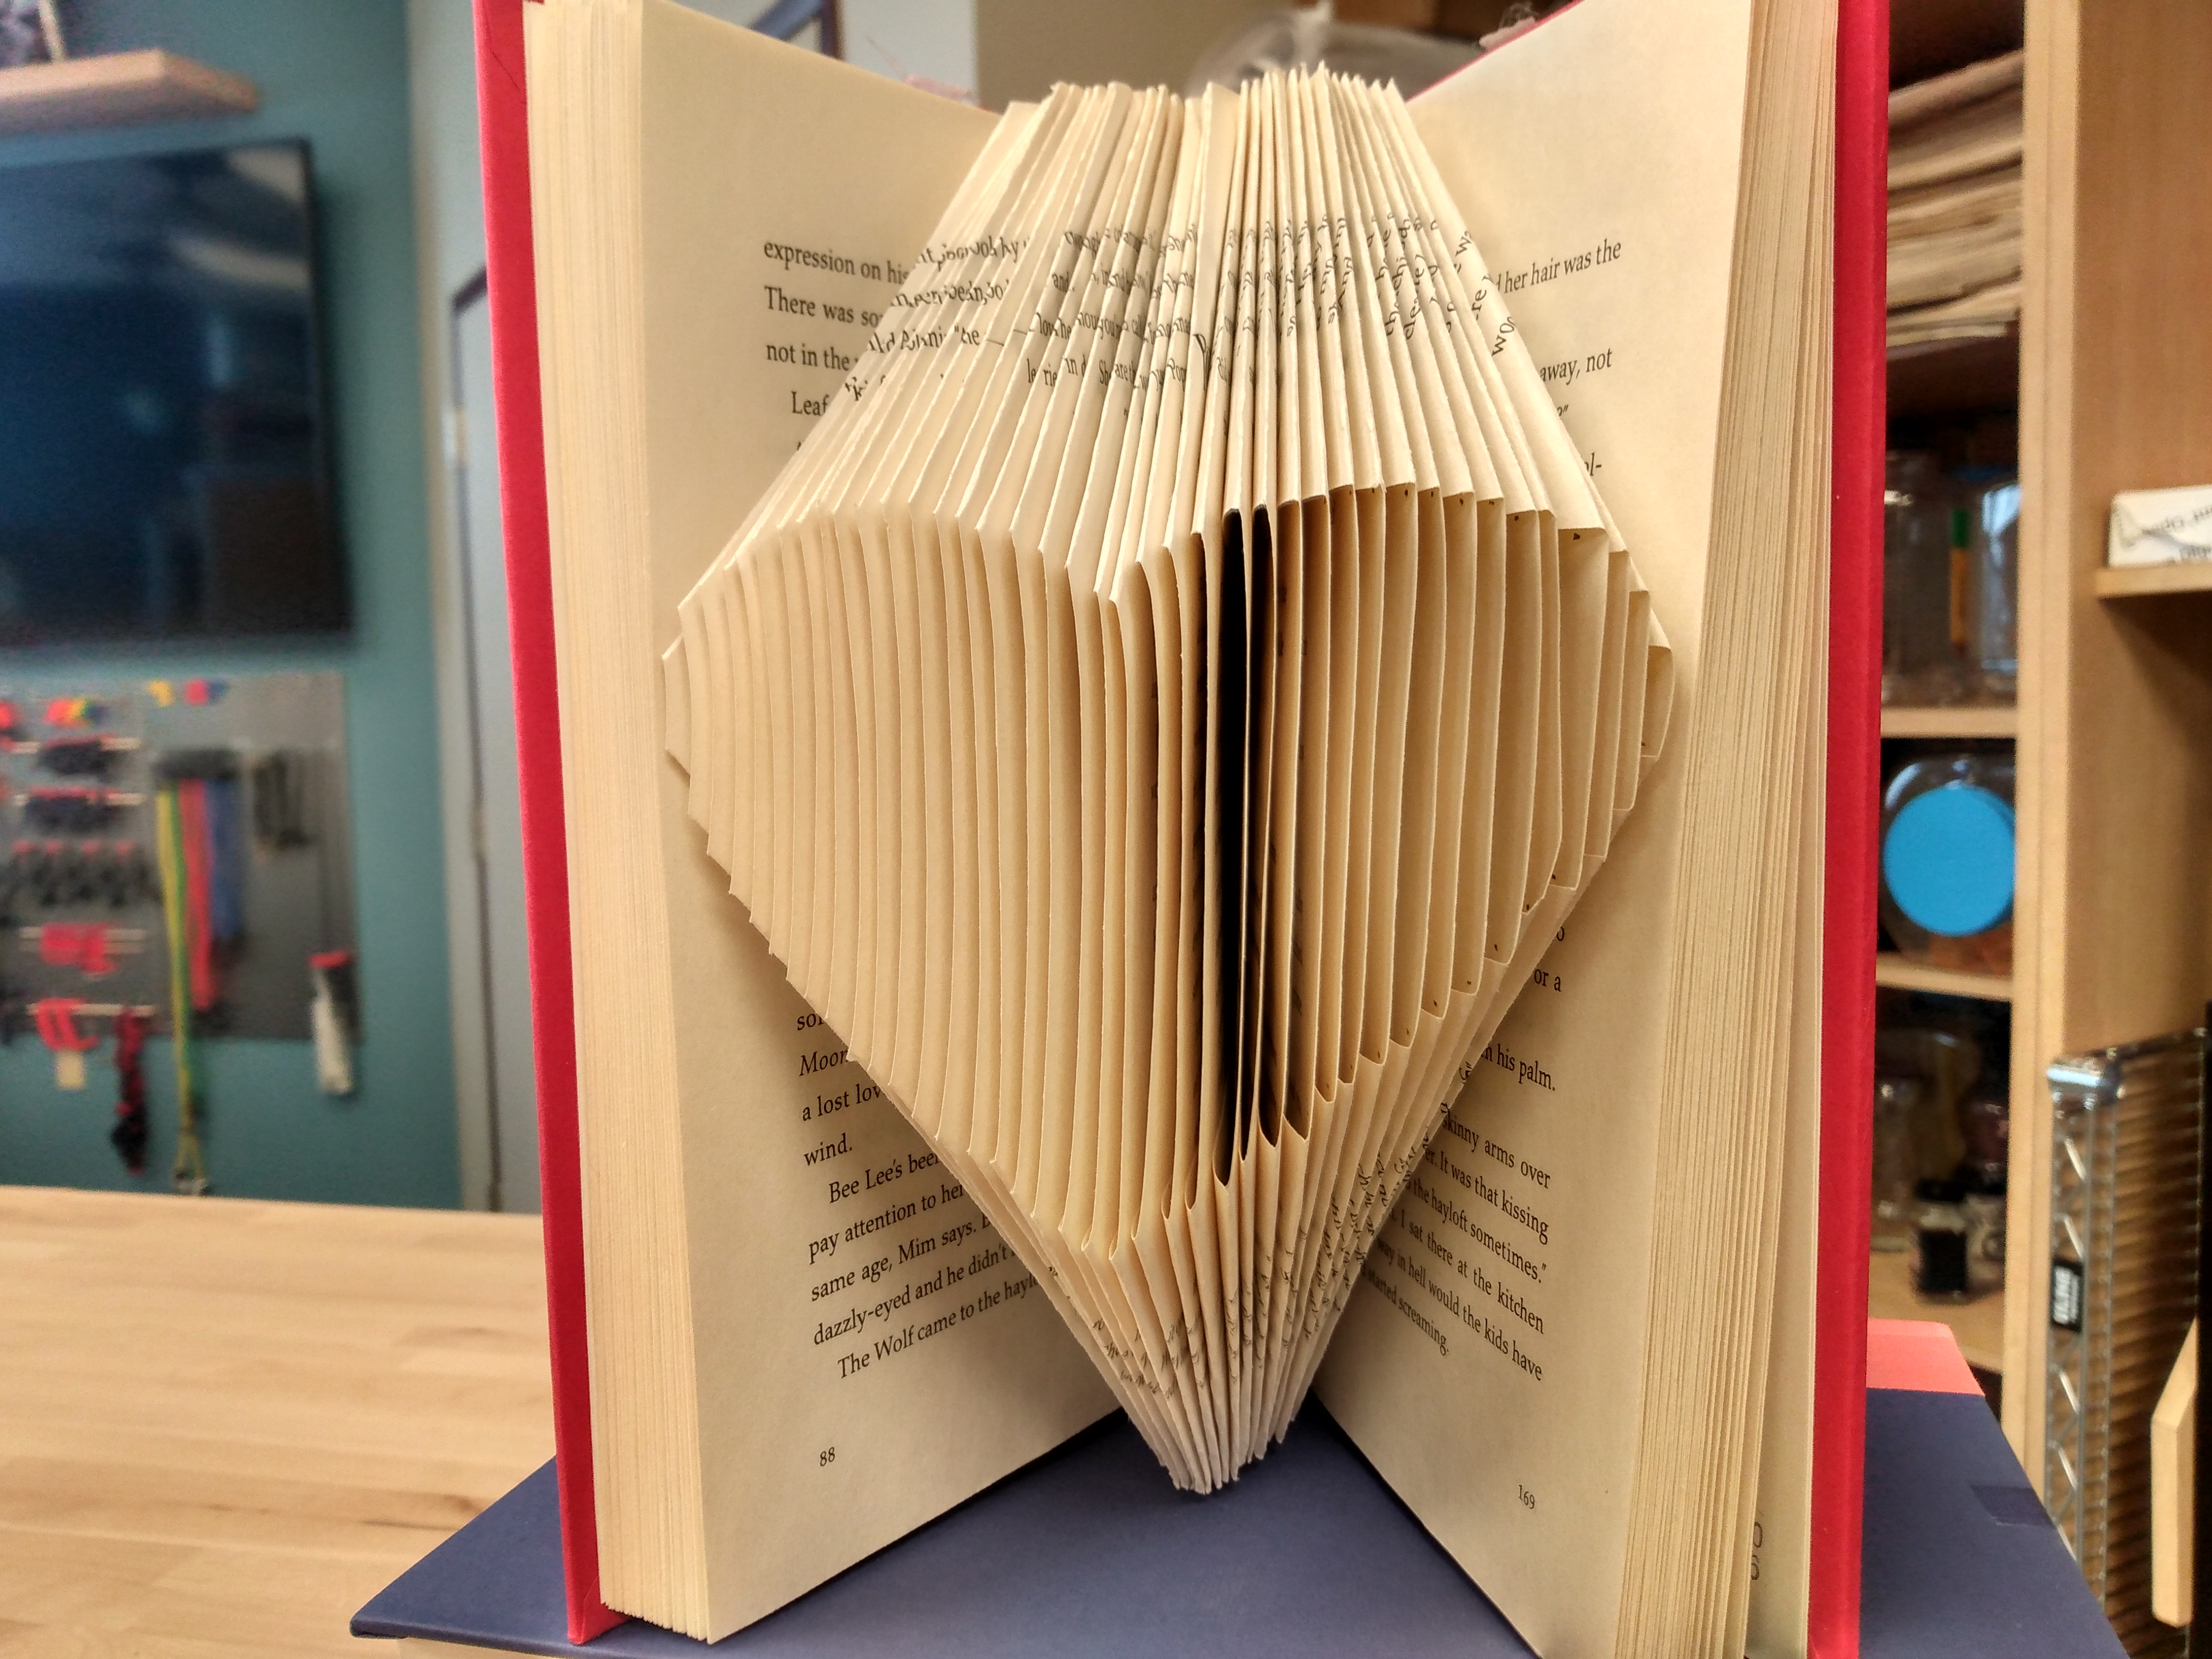 Photo of a book with pages folded in the shape of a heart